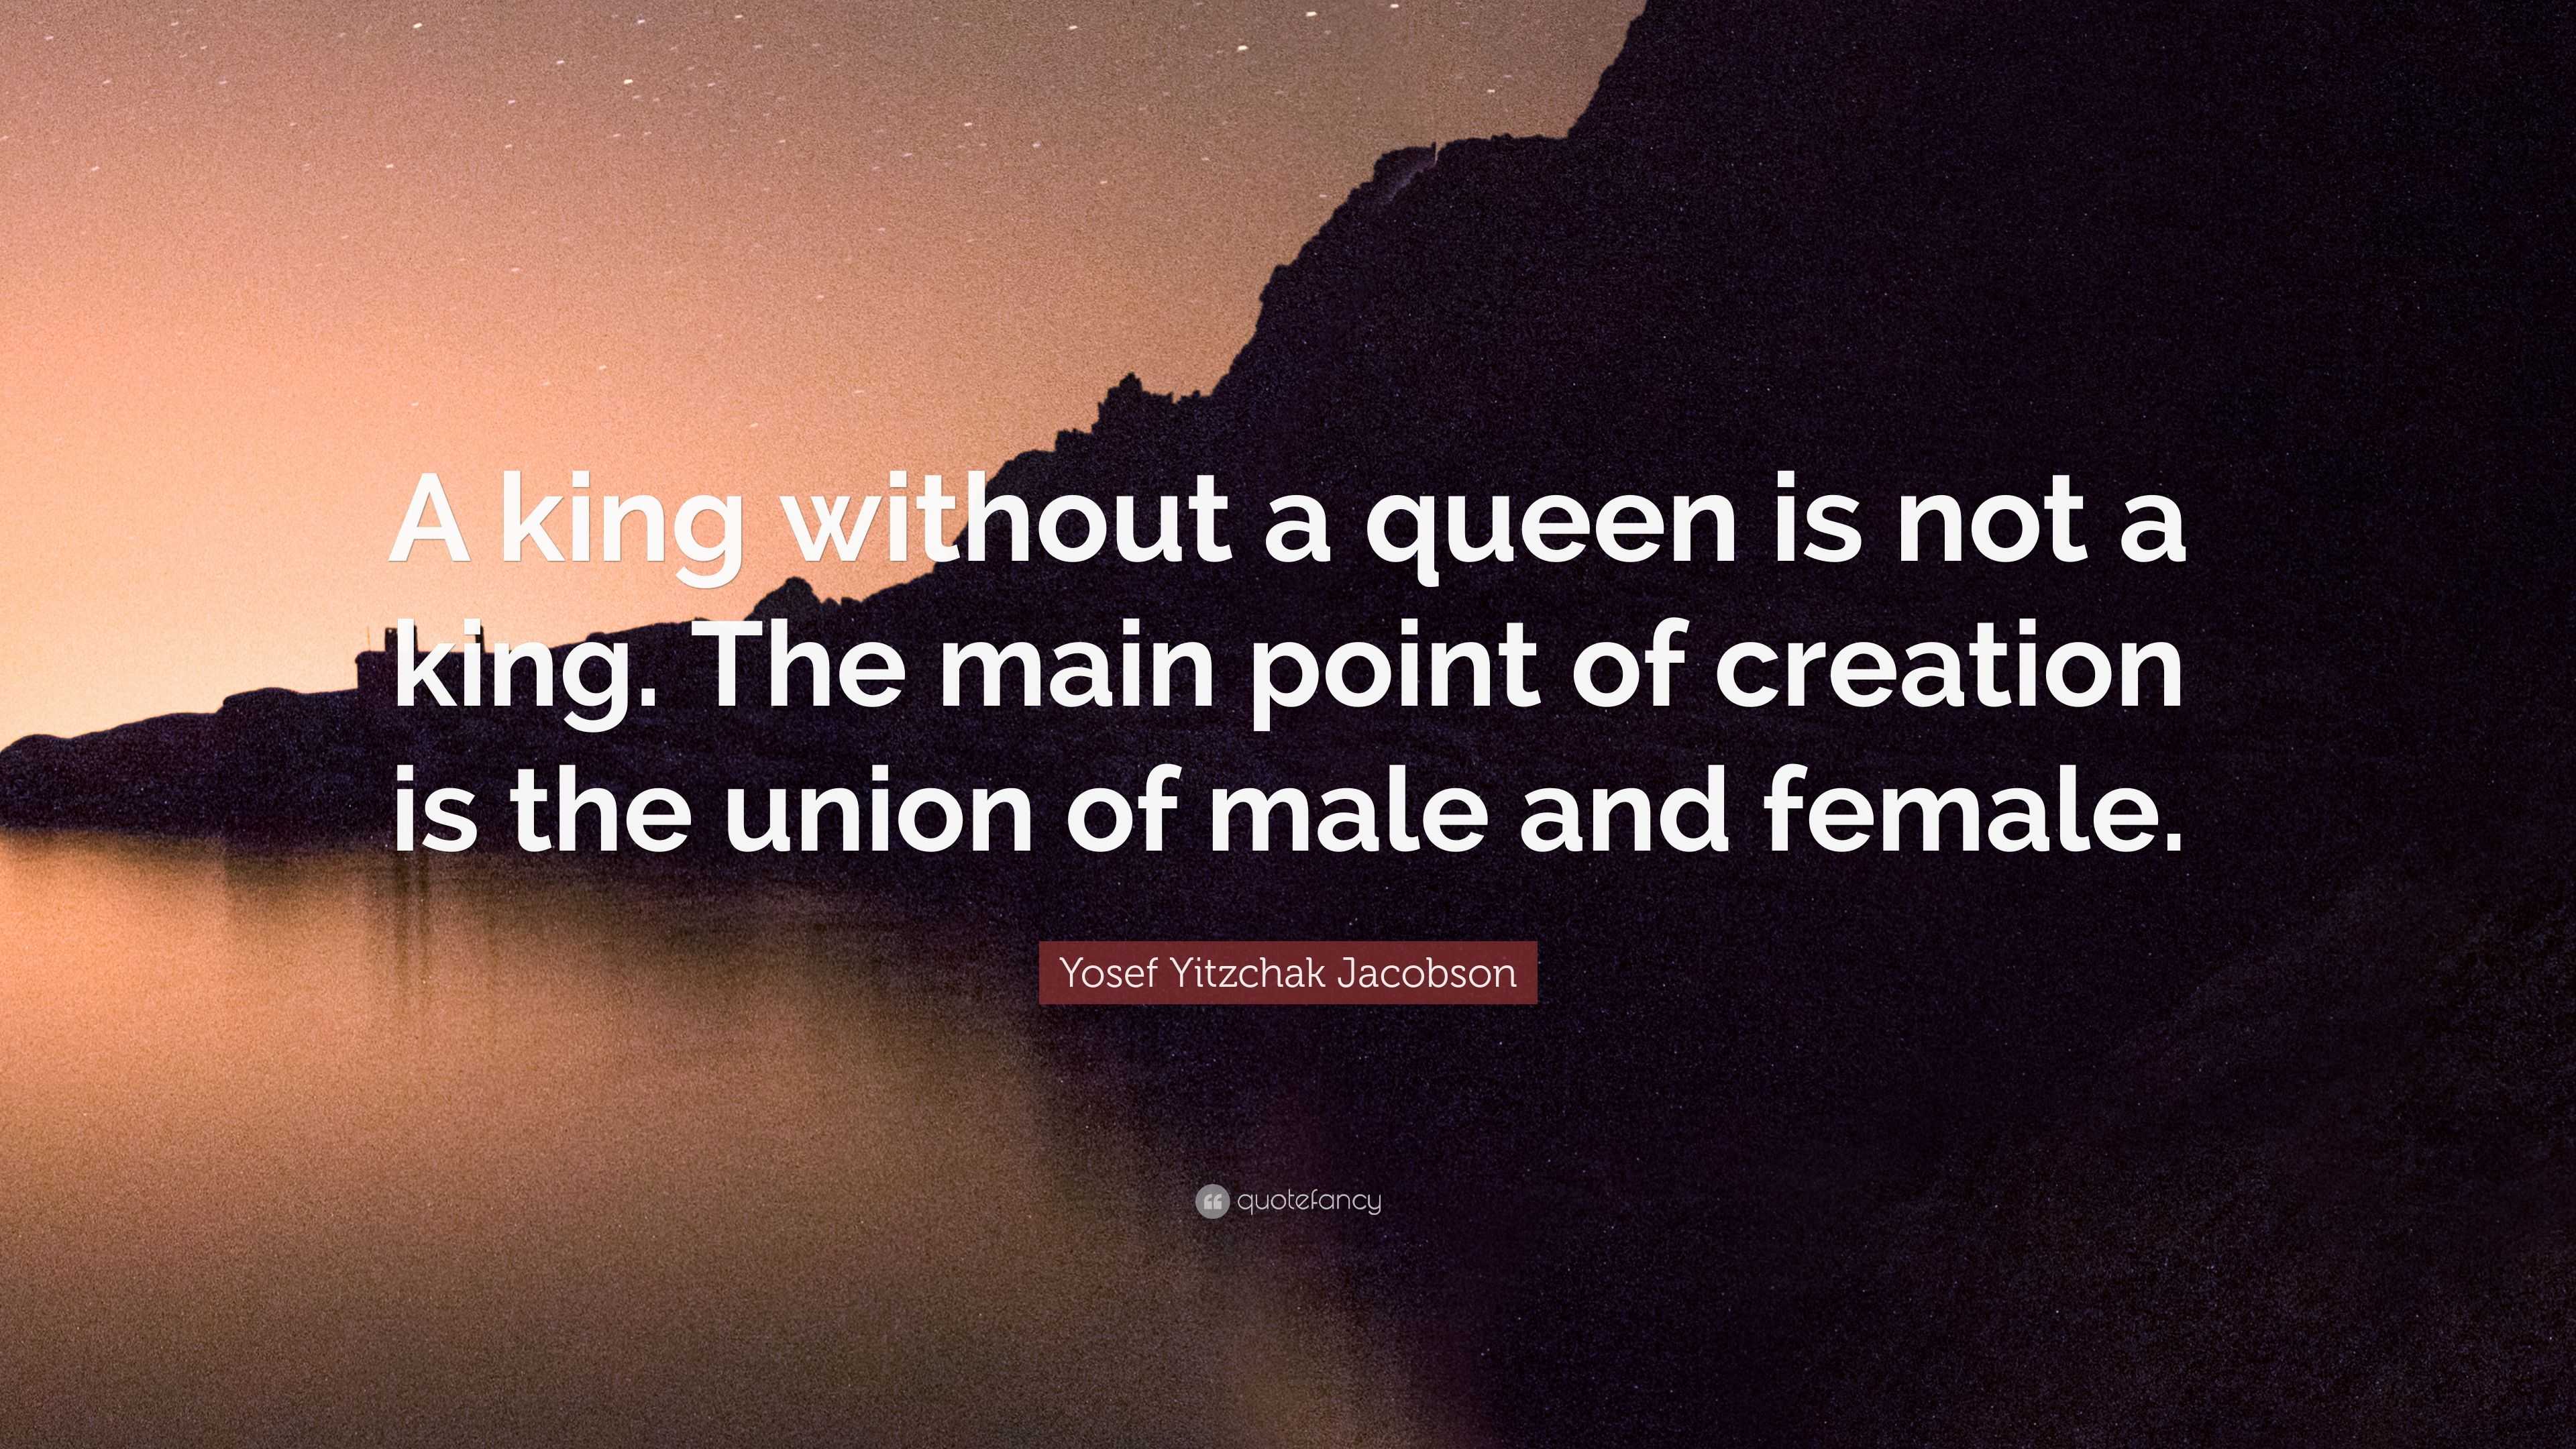 Yosef Yitzchak Jacobson Quote: “A king without a queen is not a king ...